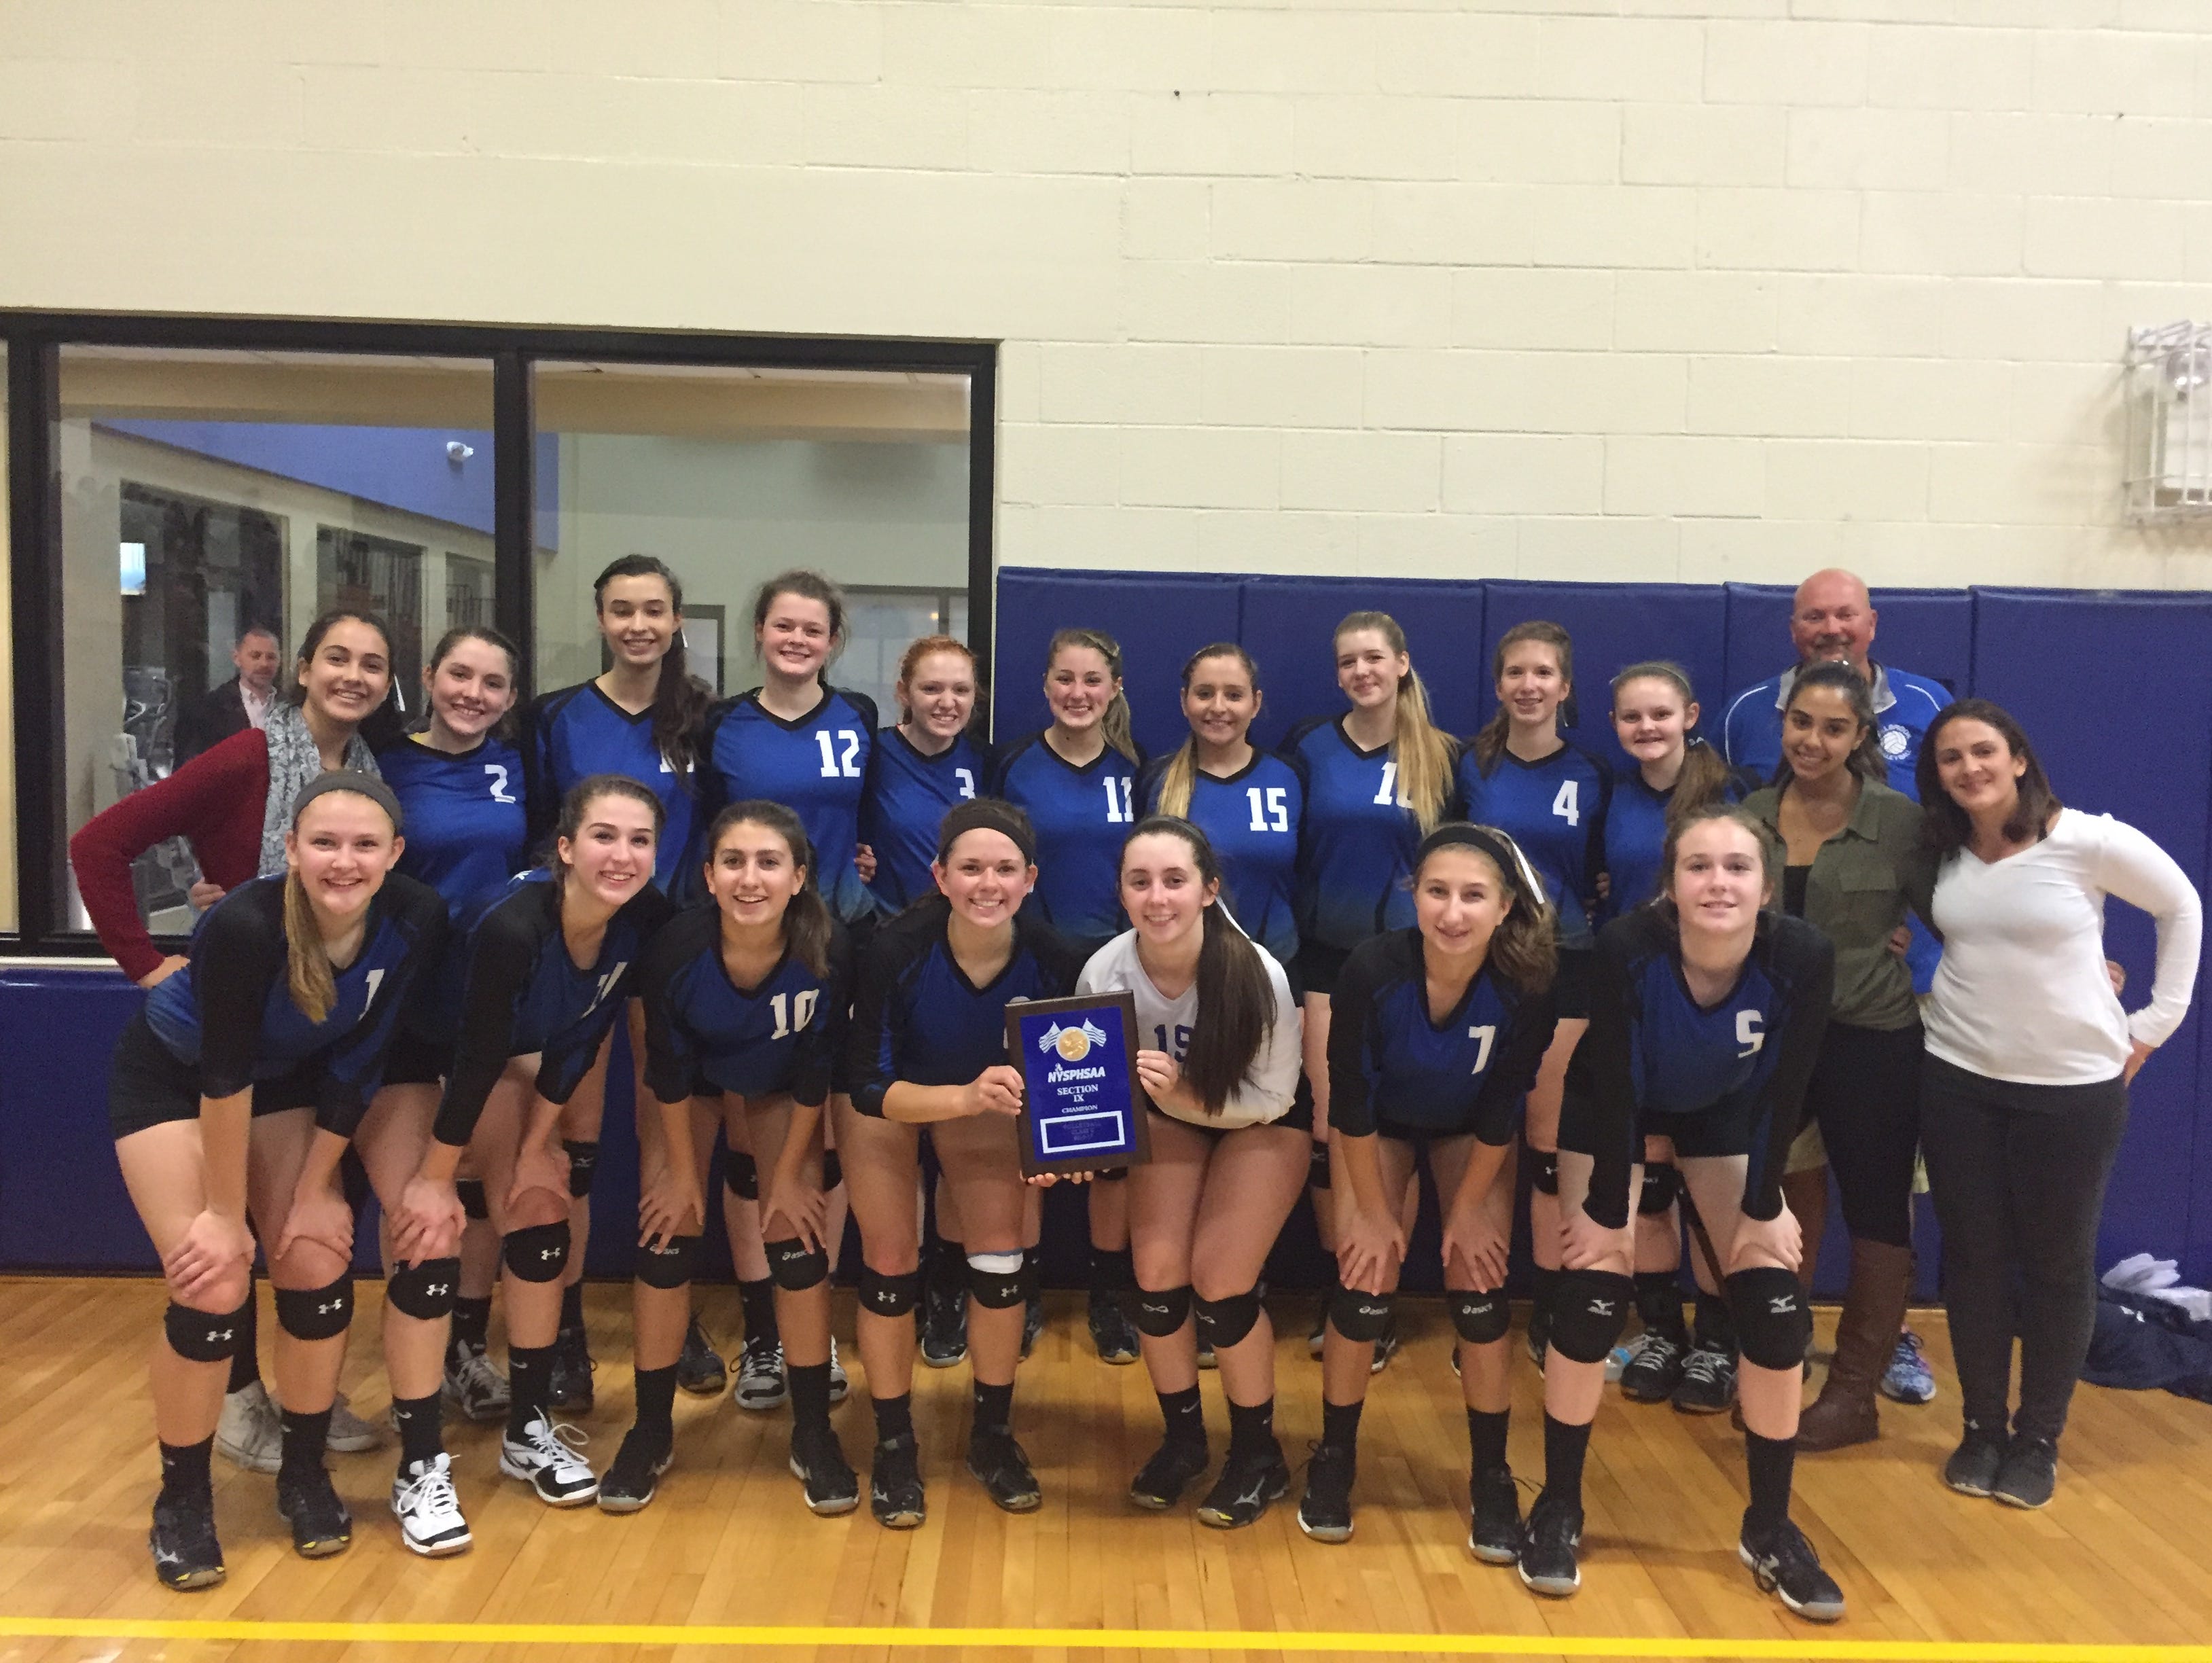 Millbrook High School's volleyball team poses after winning the Section 9 Class C title on Sunday.